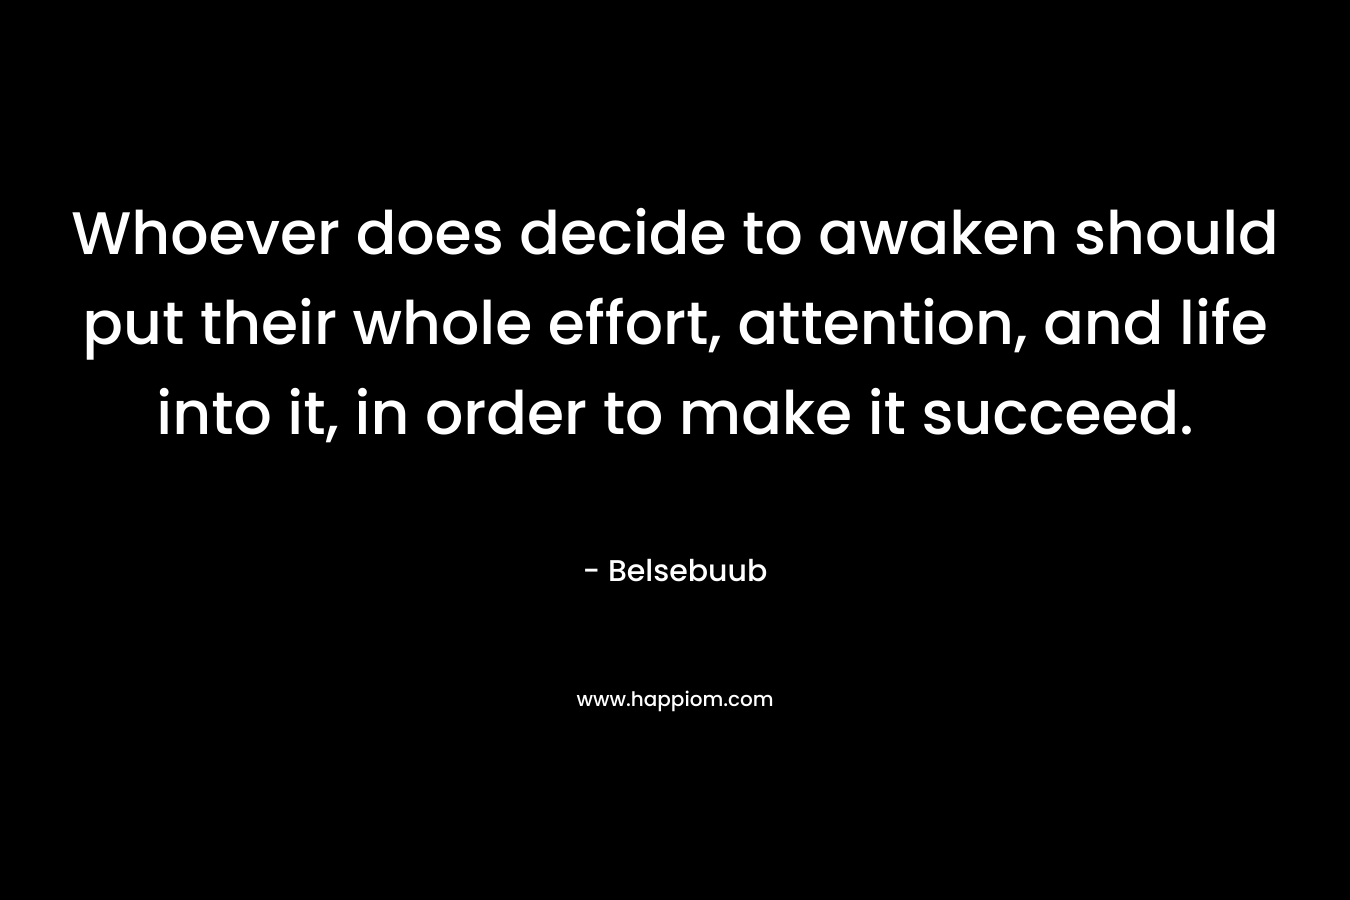 Whoever does decide to awaken should put their whole effort, attention, and life into it, in order to make it succeed. – Belsebuub